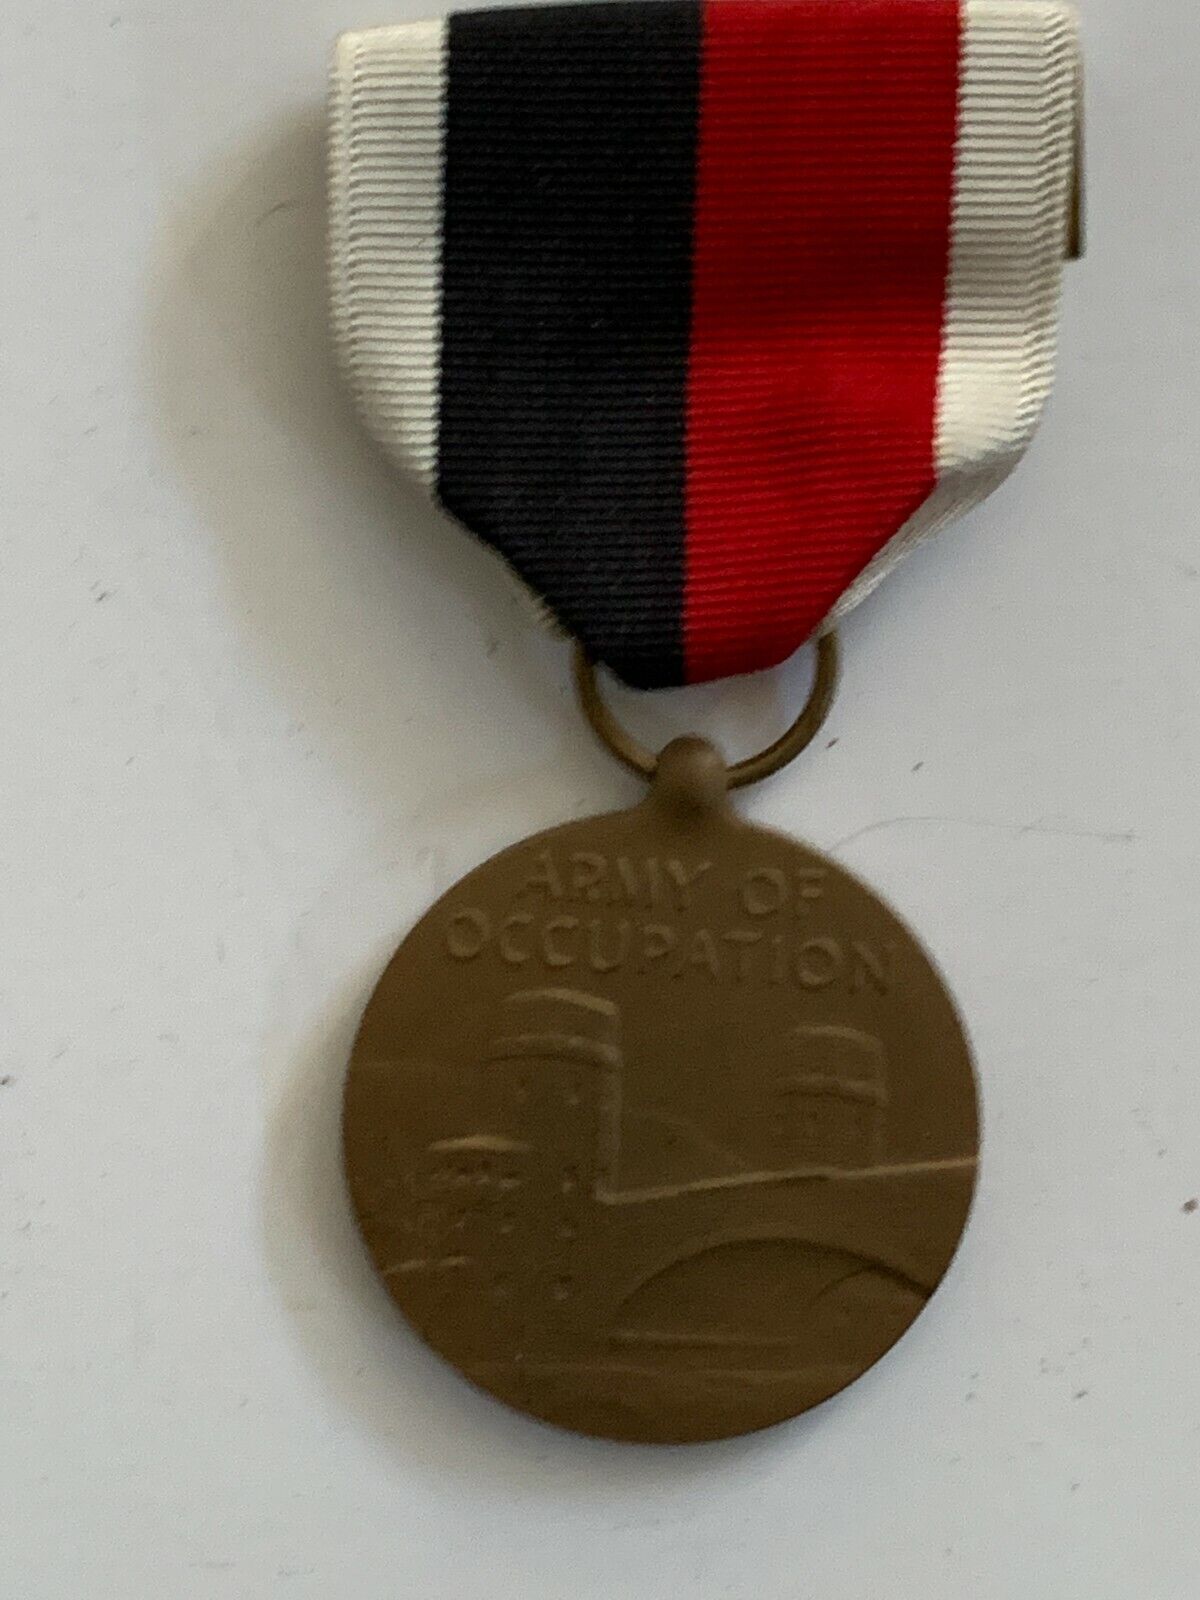 Original Full Sized US Army of Occupation Service Medal (1945)